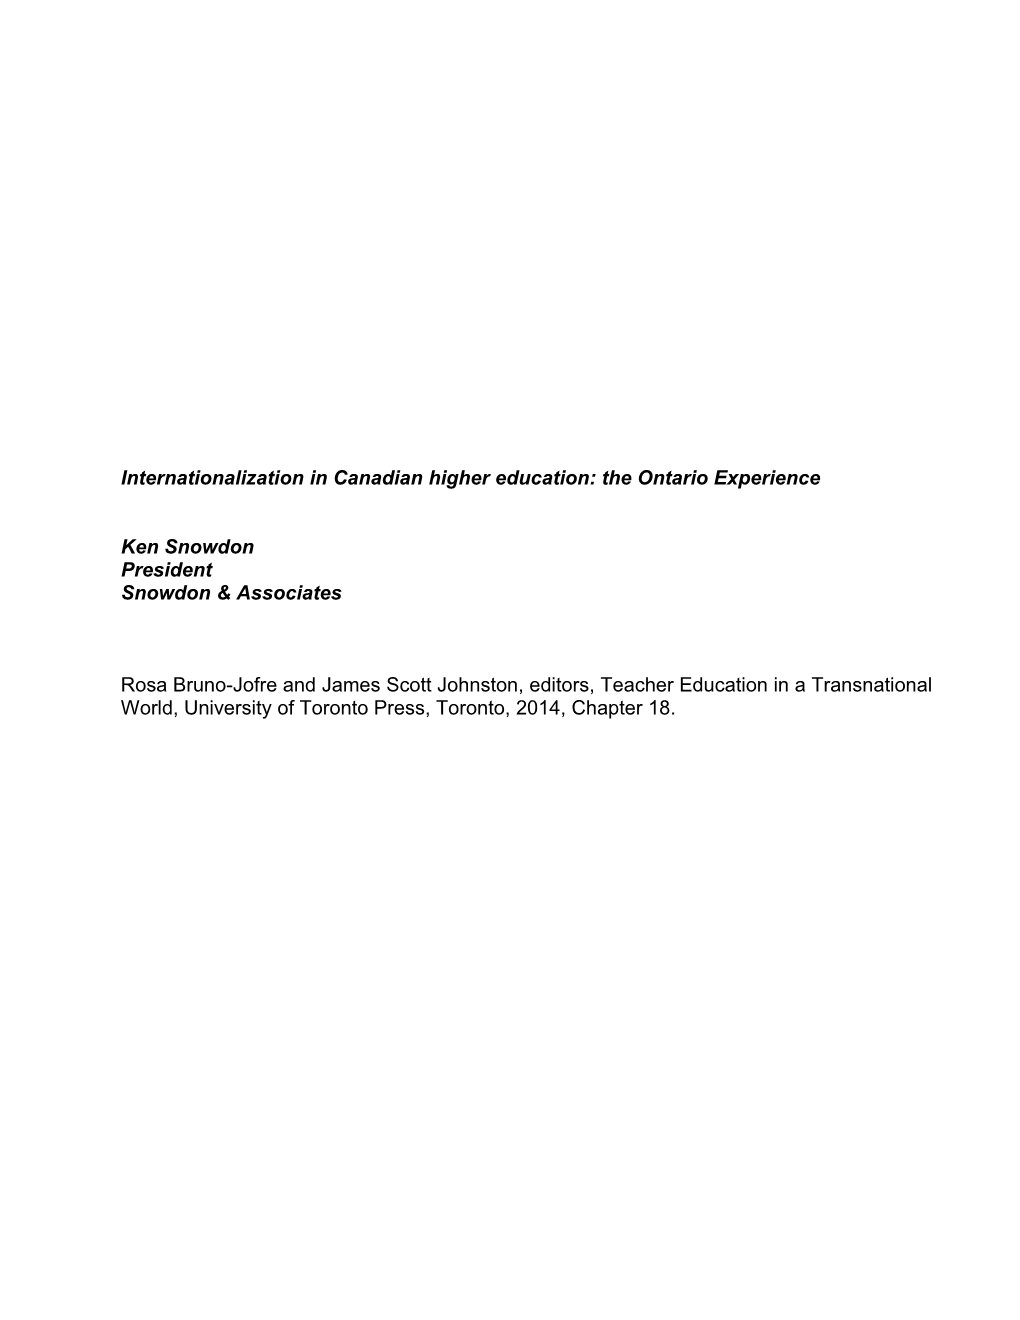 Internationalization in Canadian Higher Education: the Ontario Experience